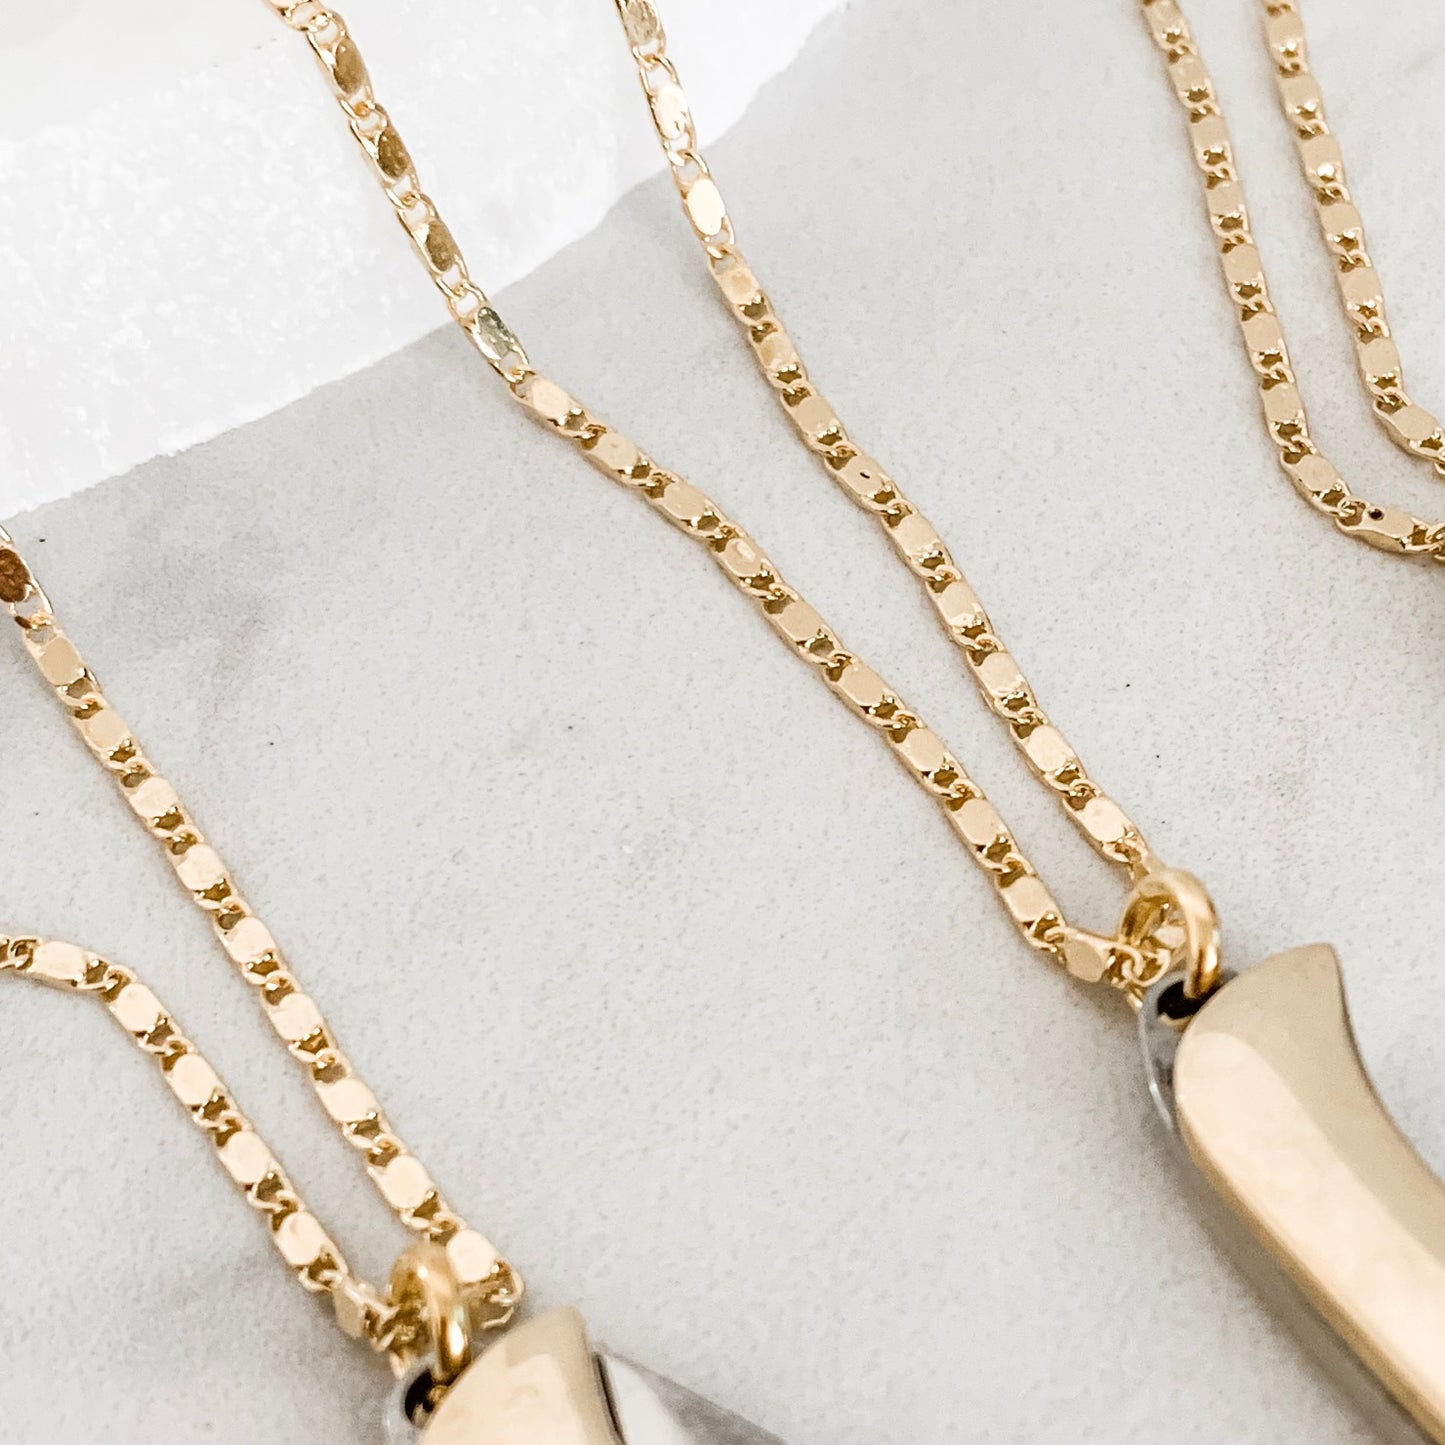 The Stay Gold Necklace